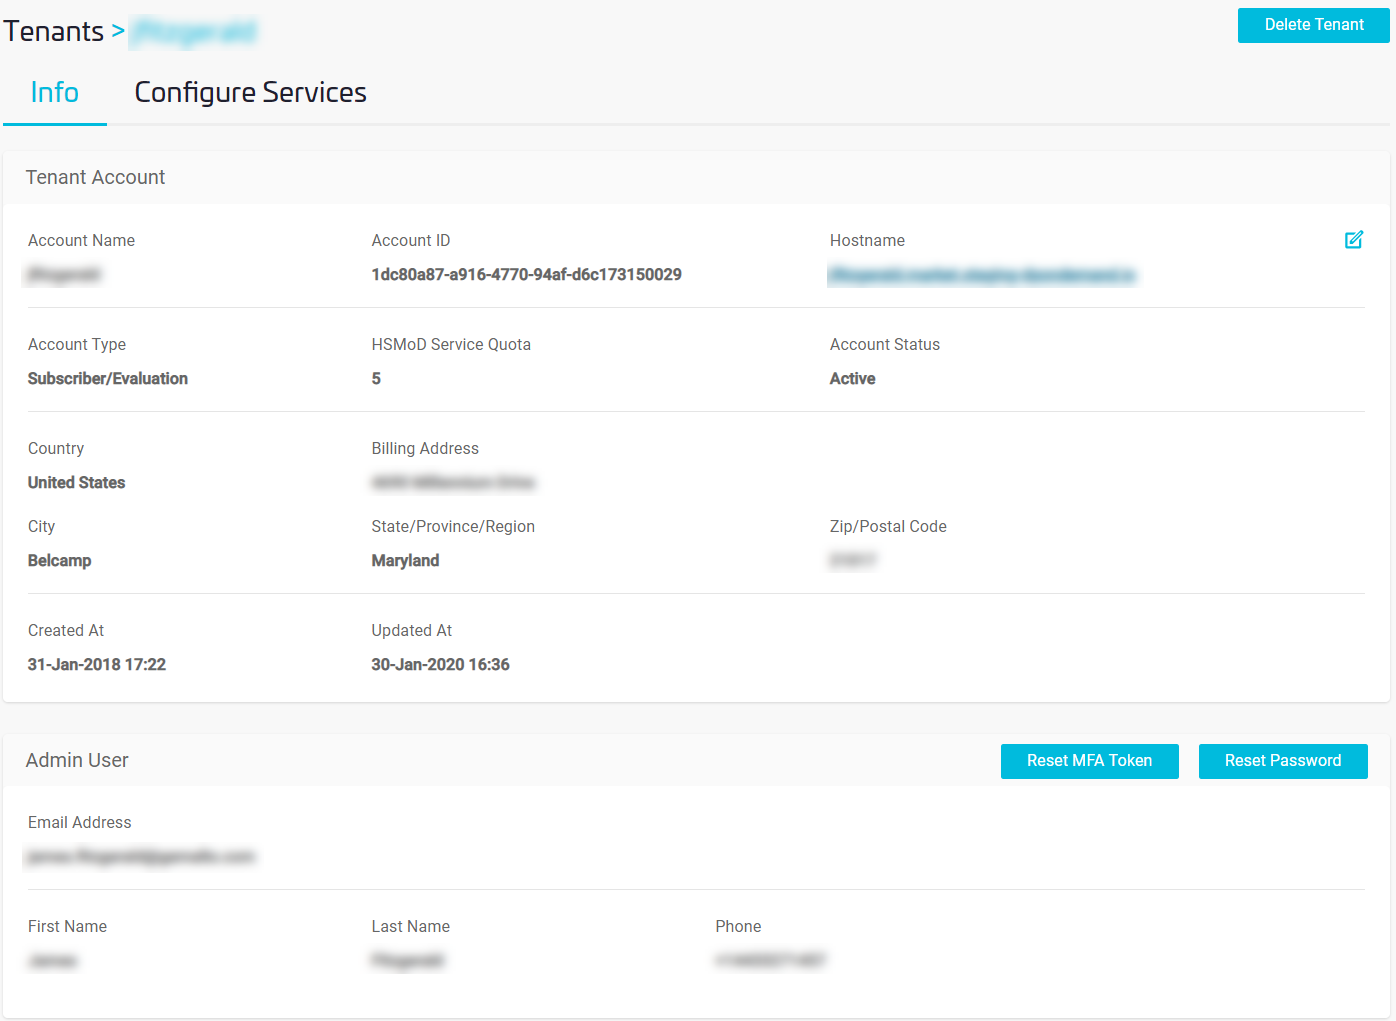 Screenshot of the Tenant Details Page in a DPoD platform service provider tenant.